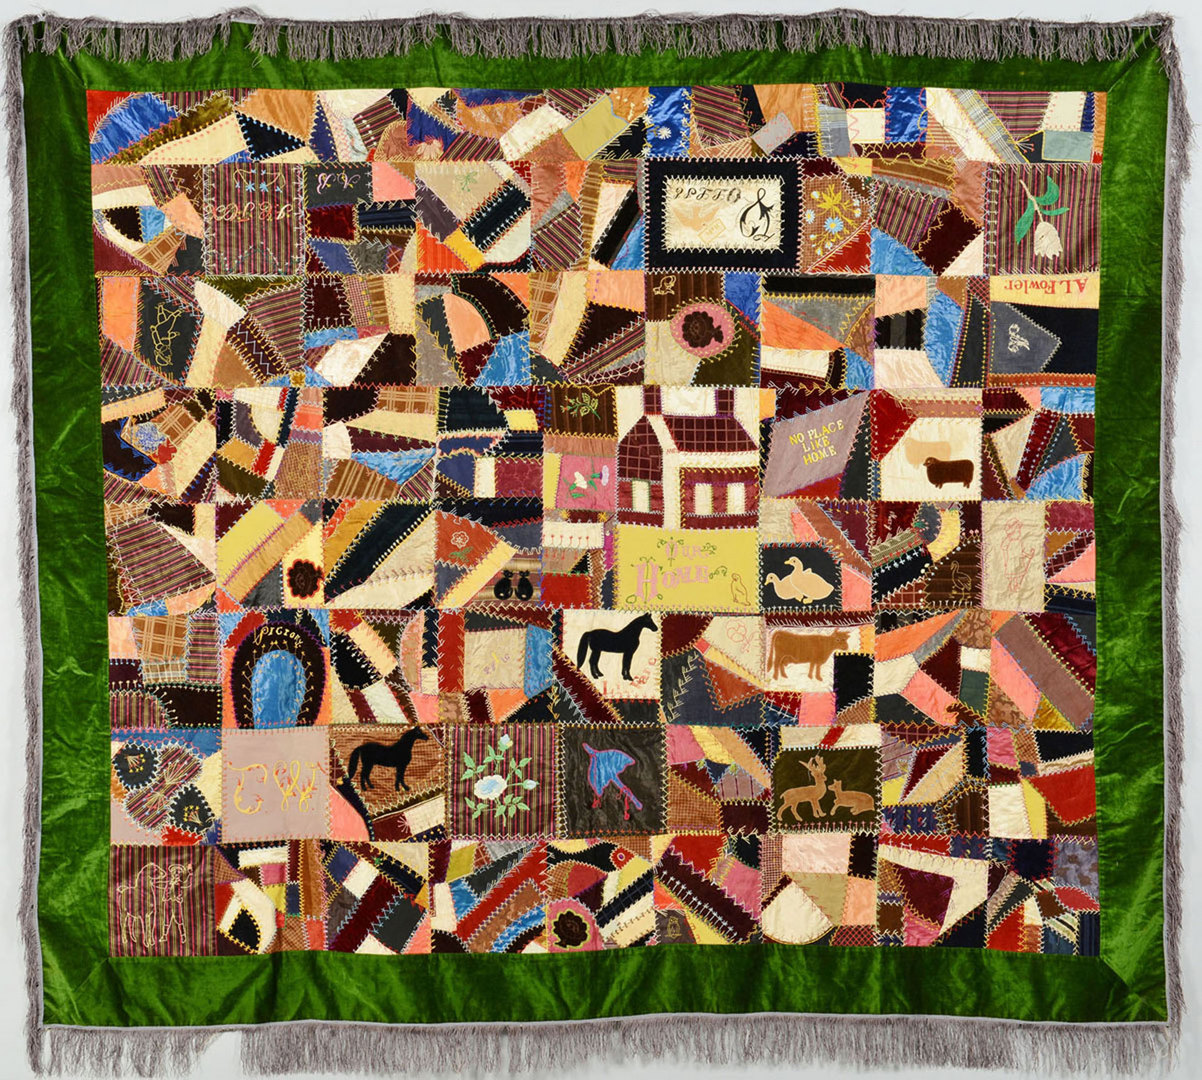 Lot 409: TN Crazy Quilt with House and Animals | Case Auctions